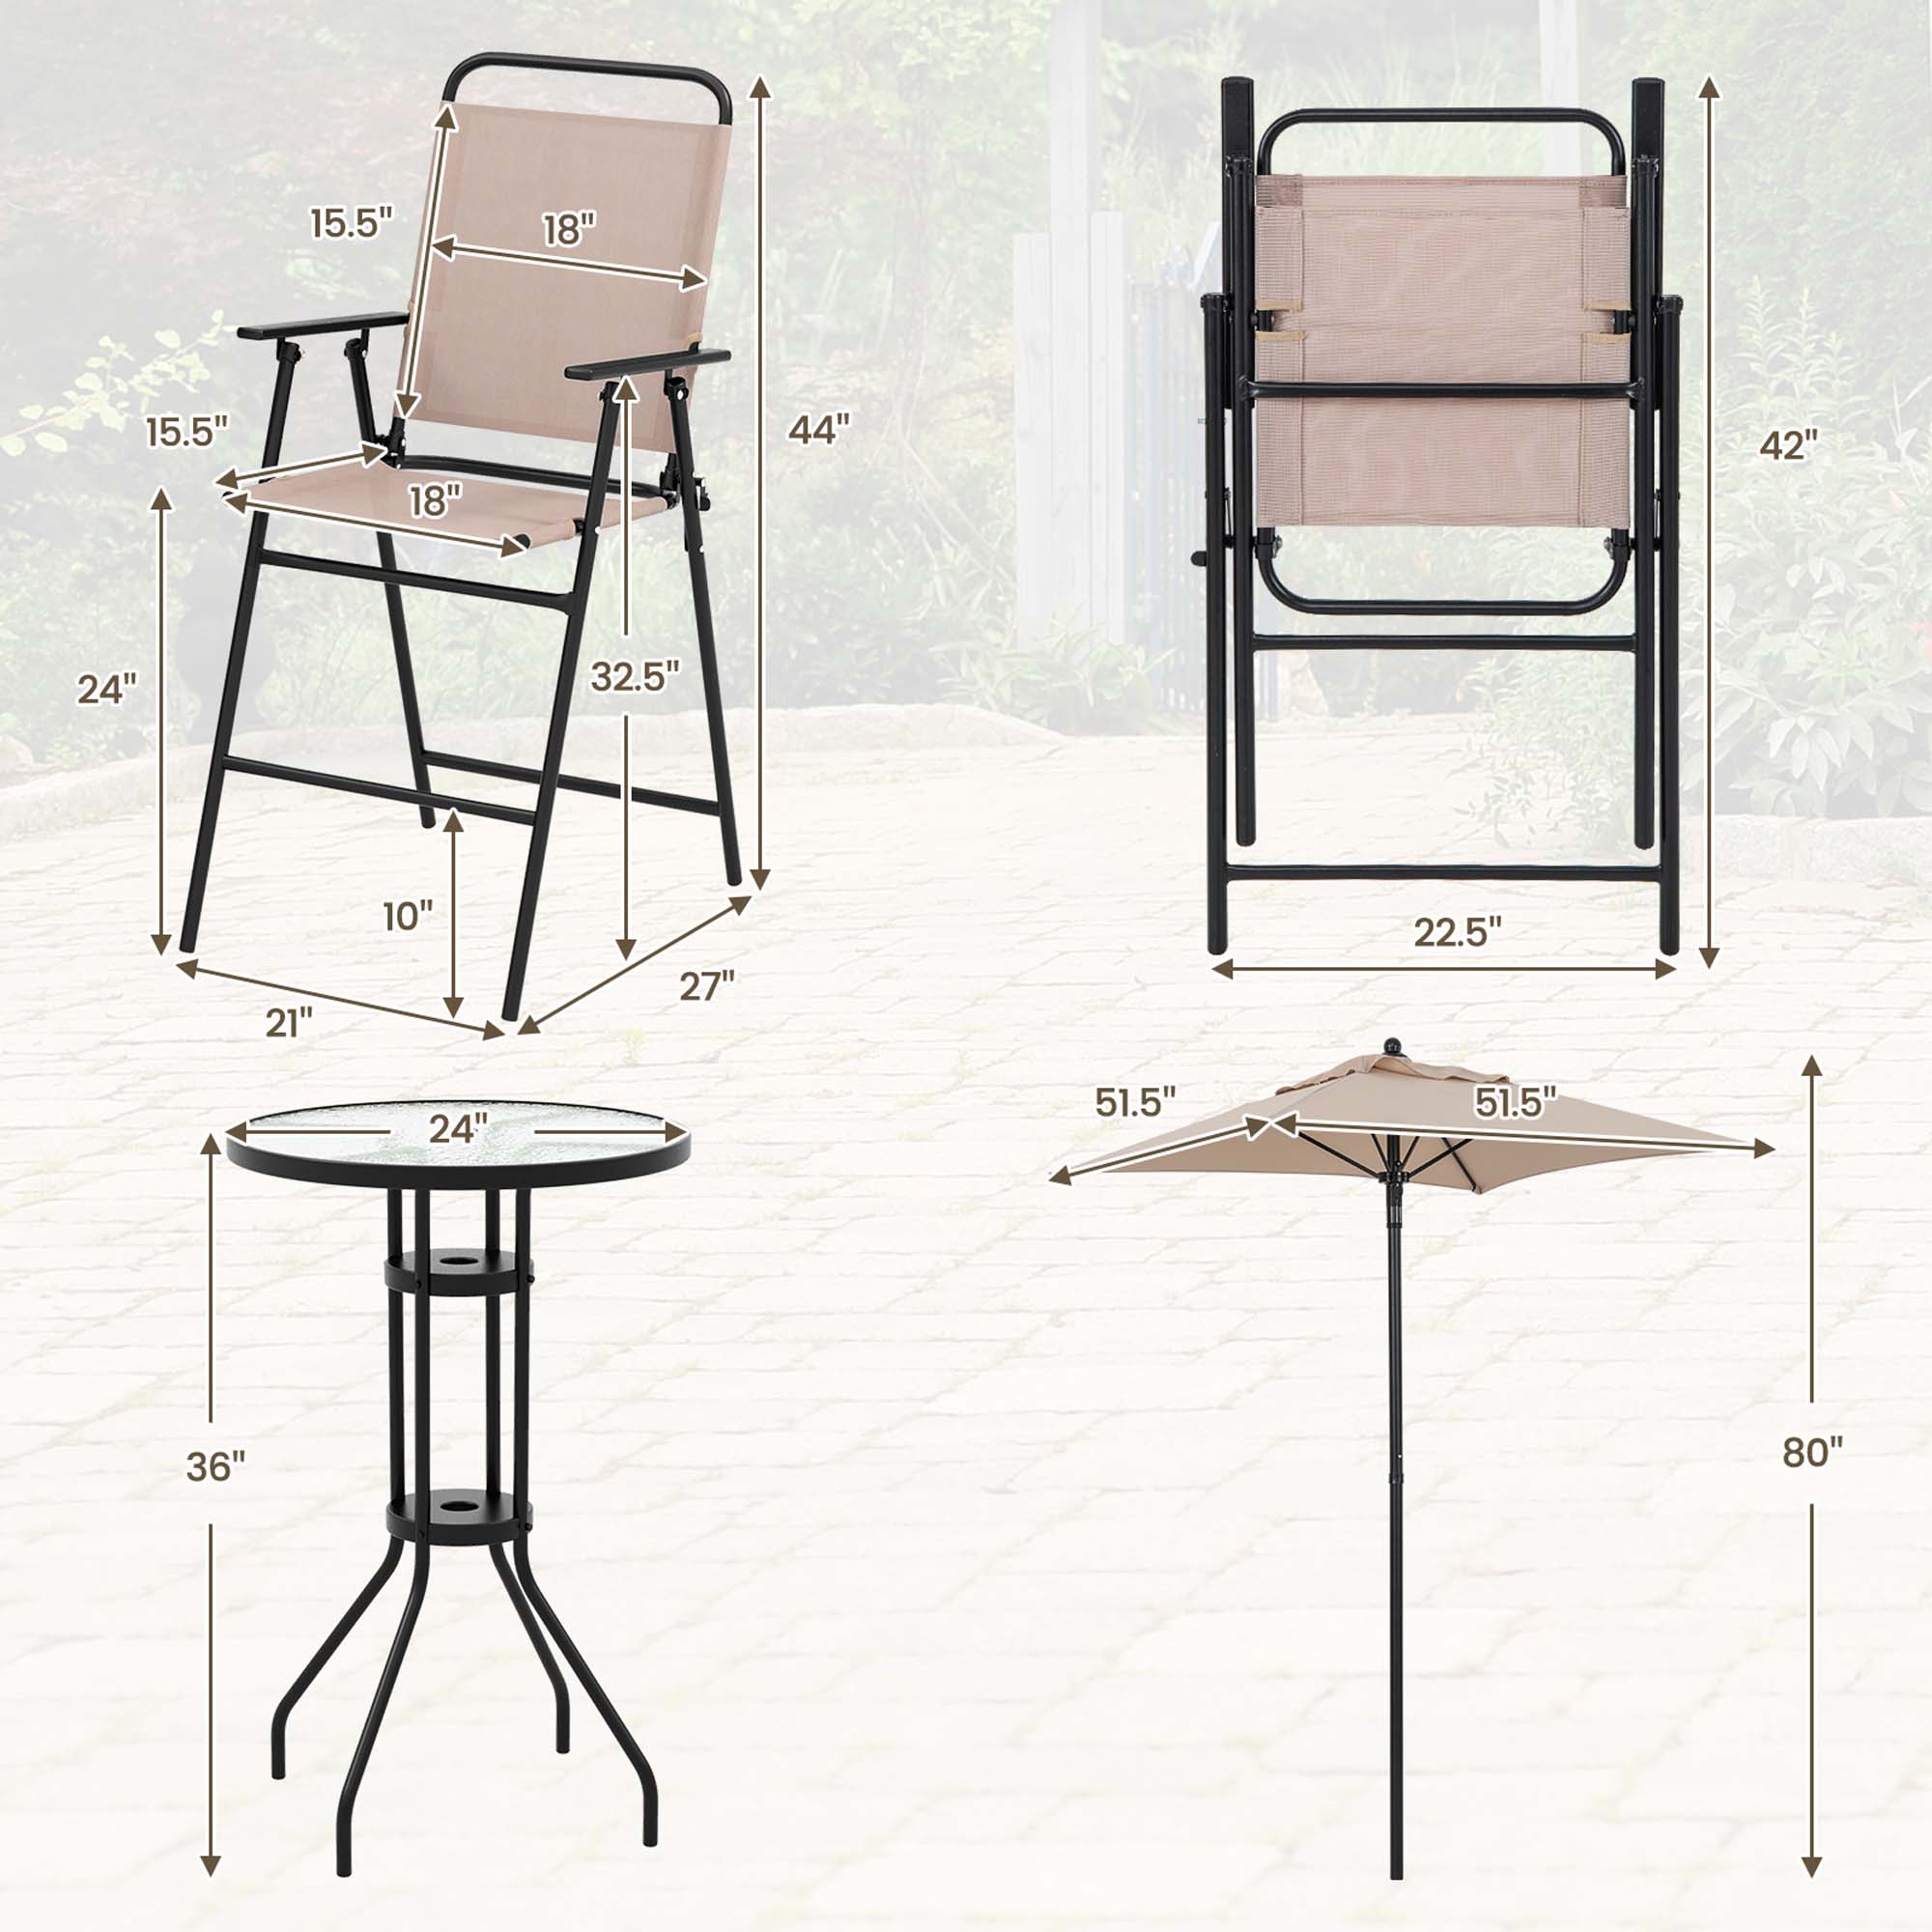 Costway 4PCS Patio Bistro Set Folding Counter Height Chairs Round Bar Table& Umbrella